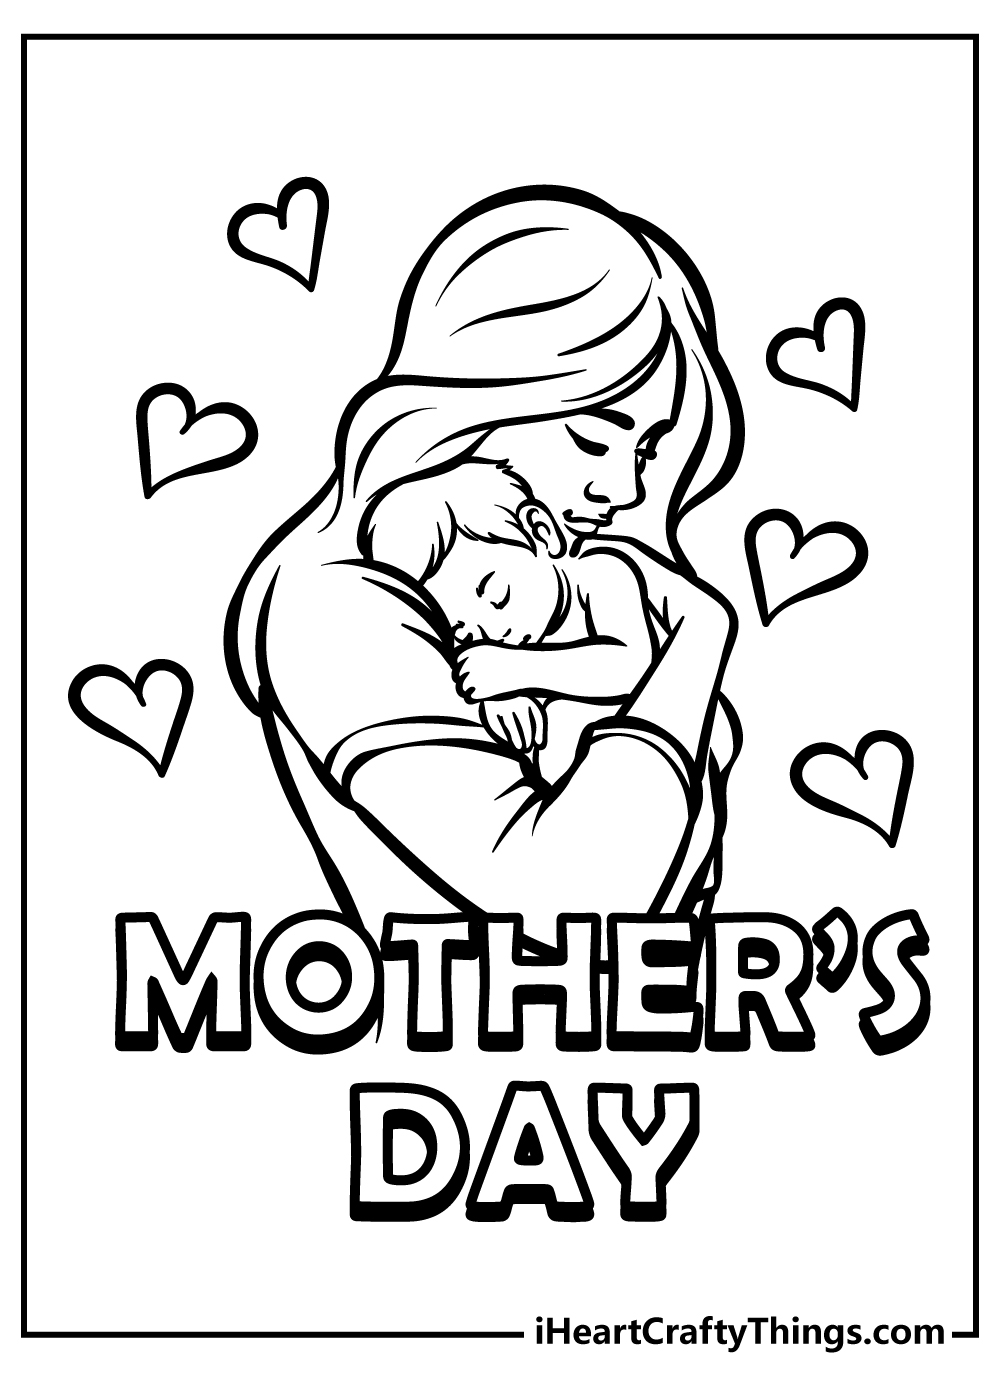 mother's day coloring book for children